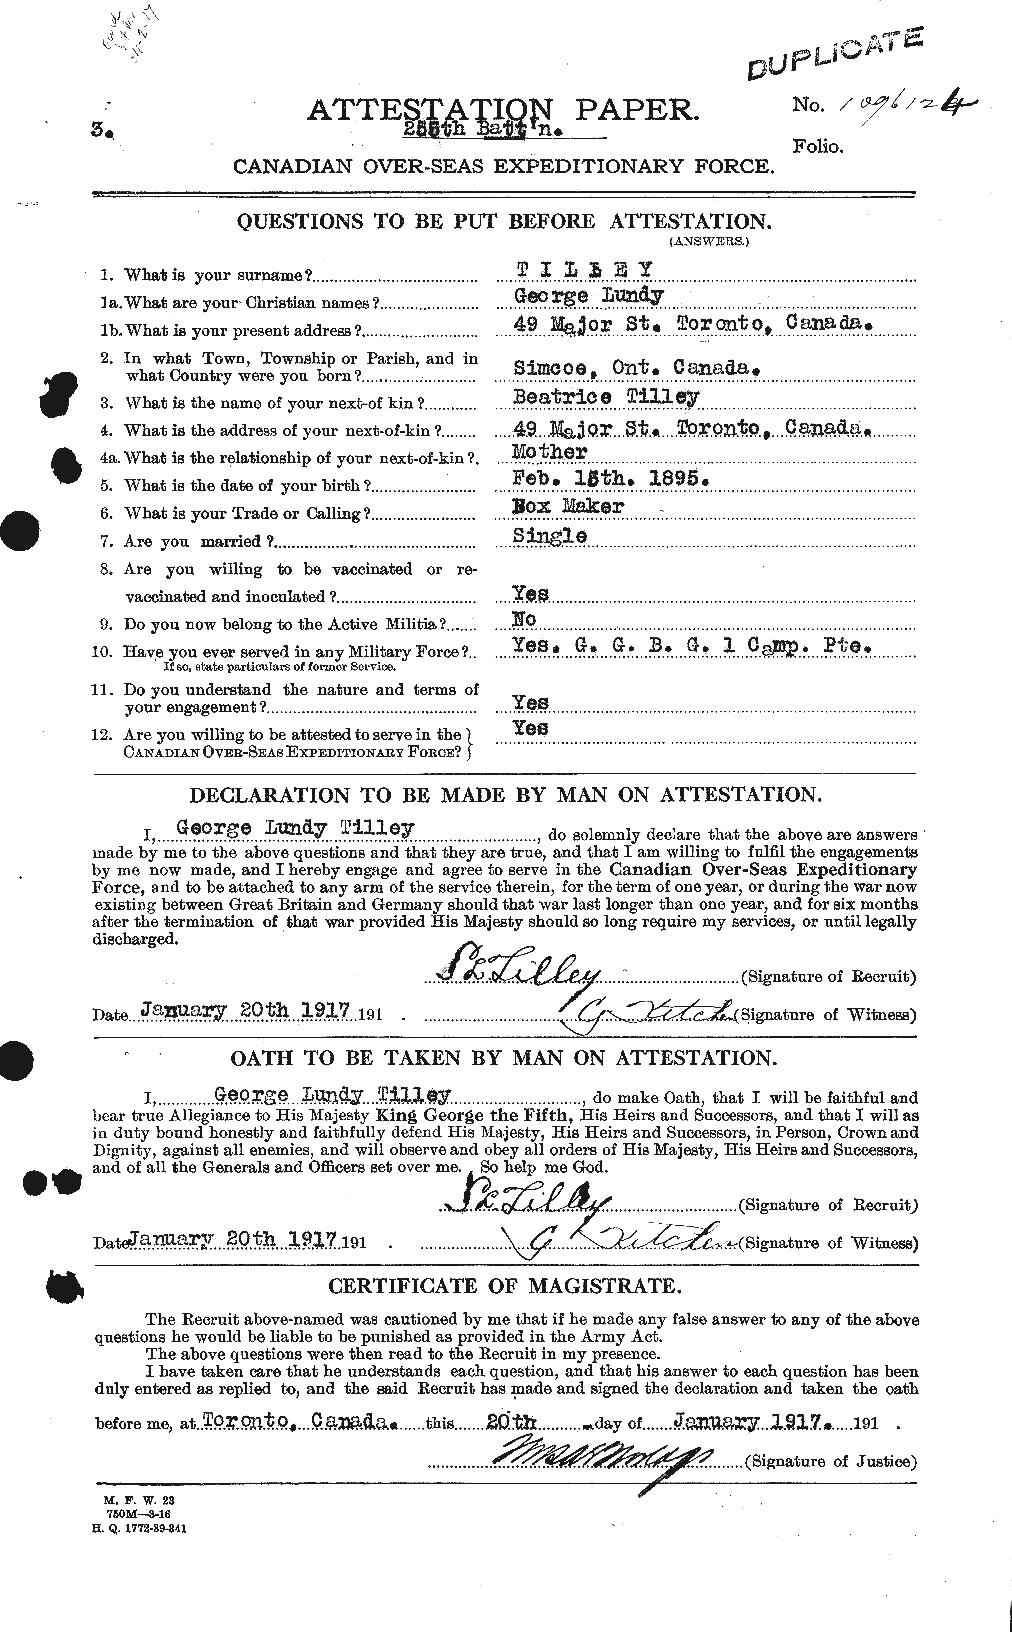 Personnel Records of the First World War - CEF 638120a